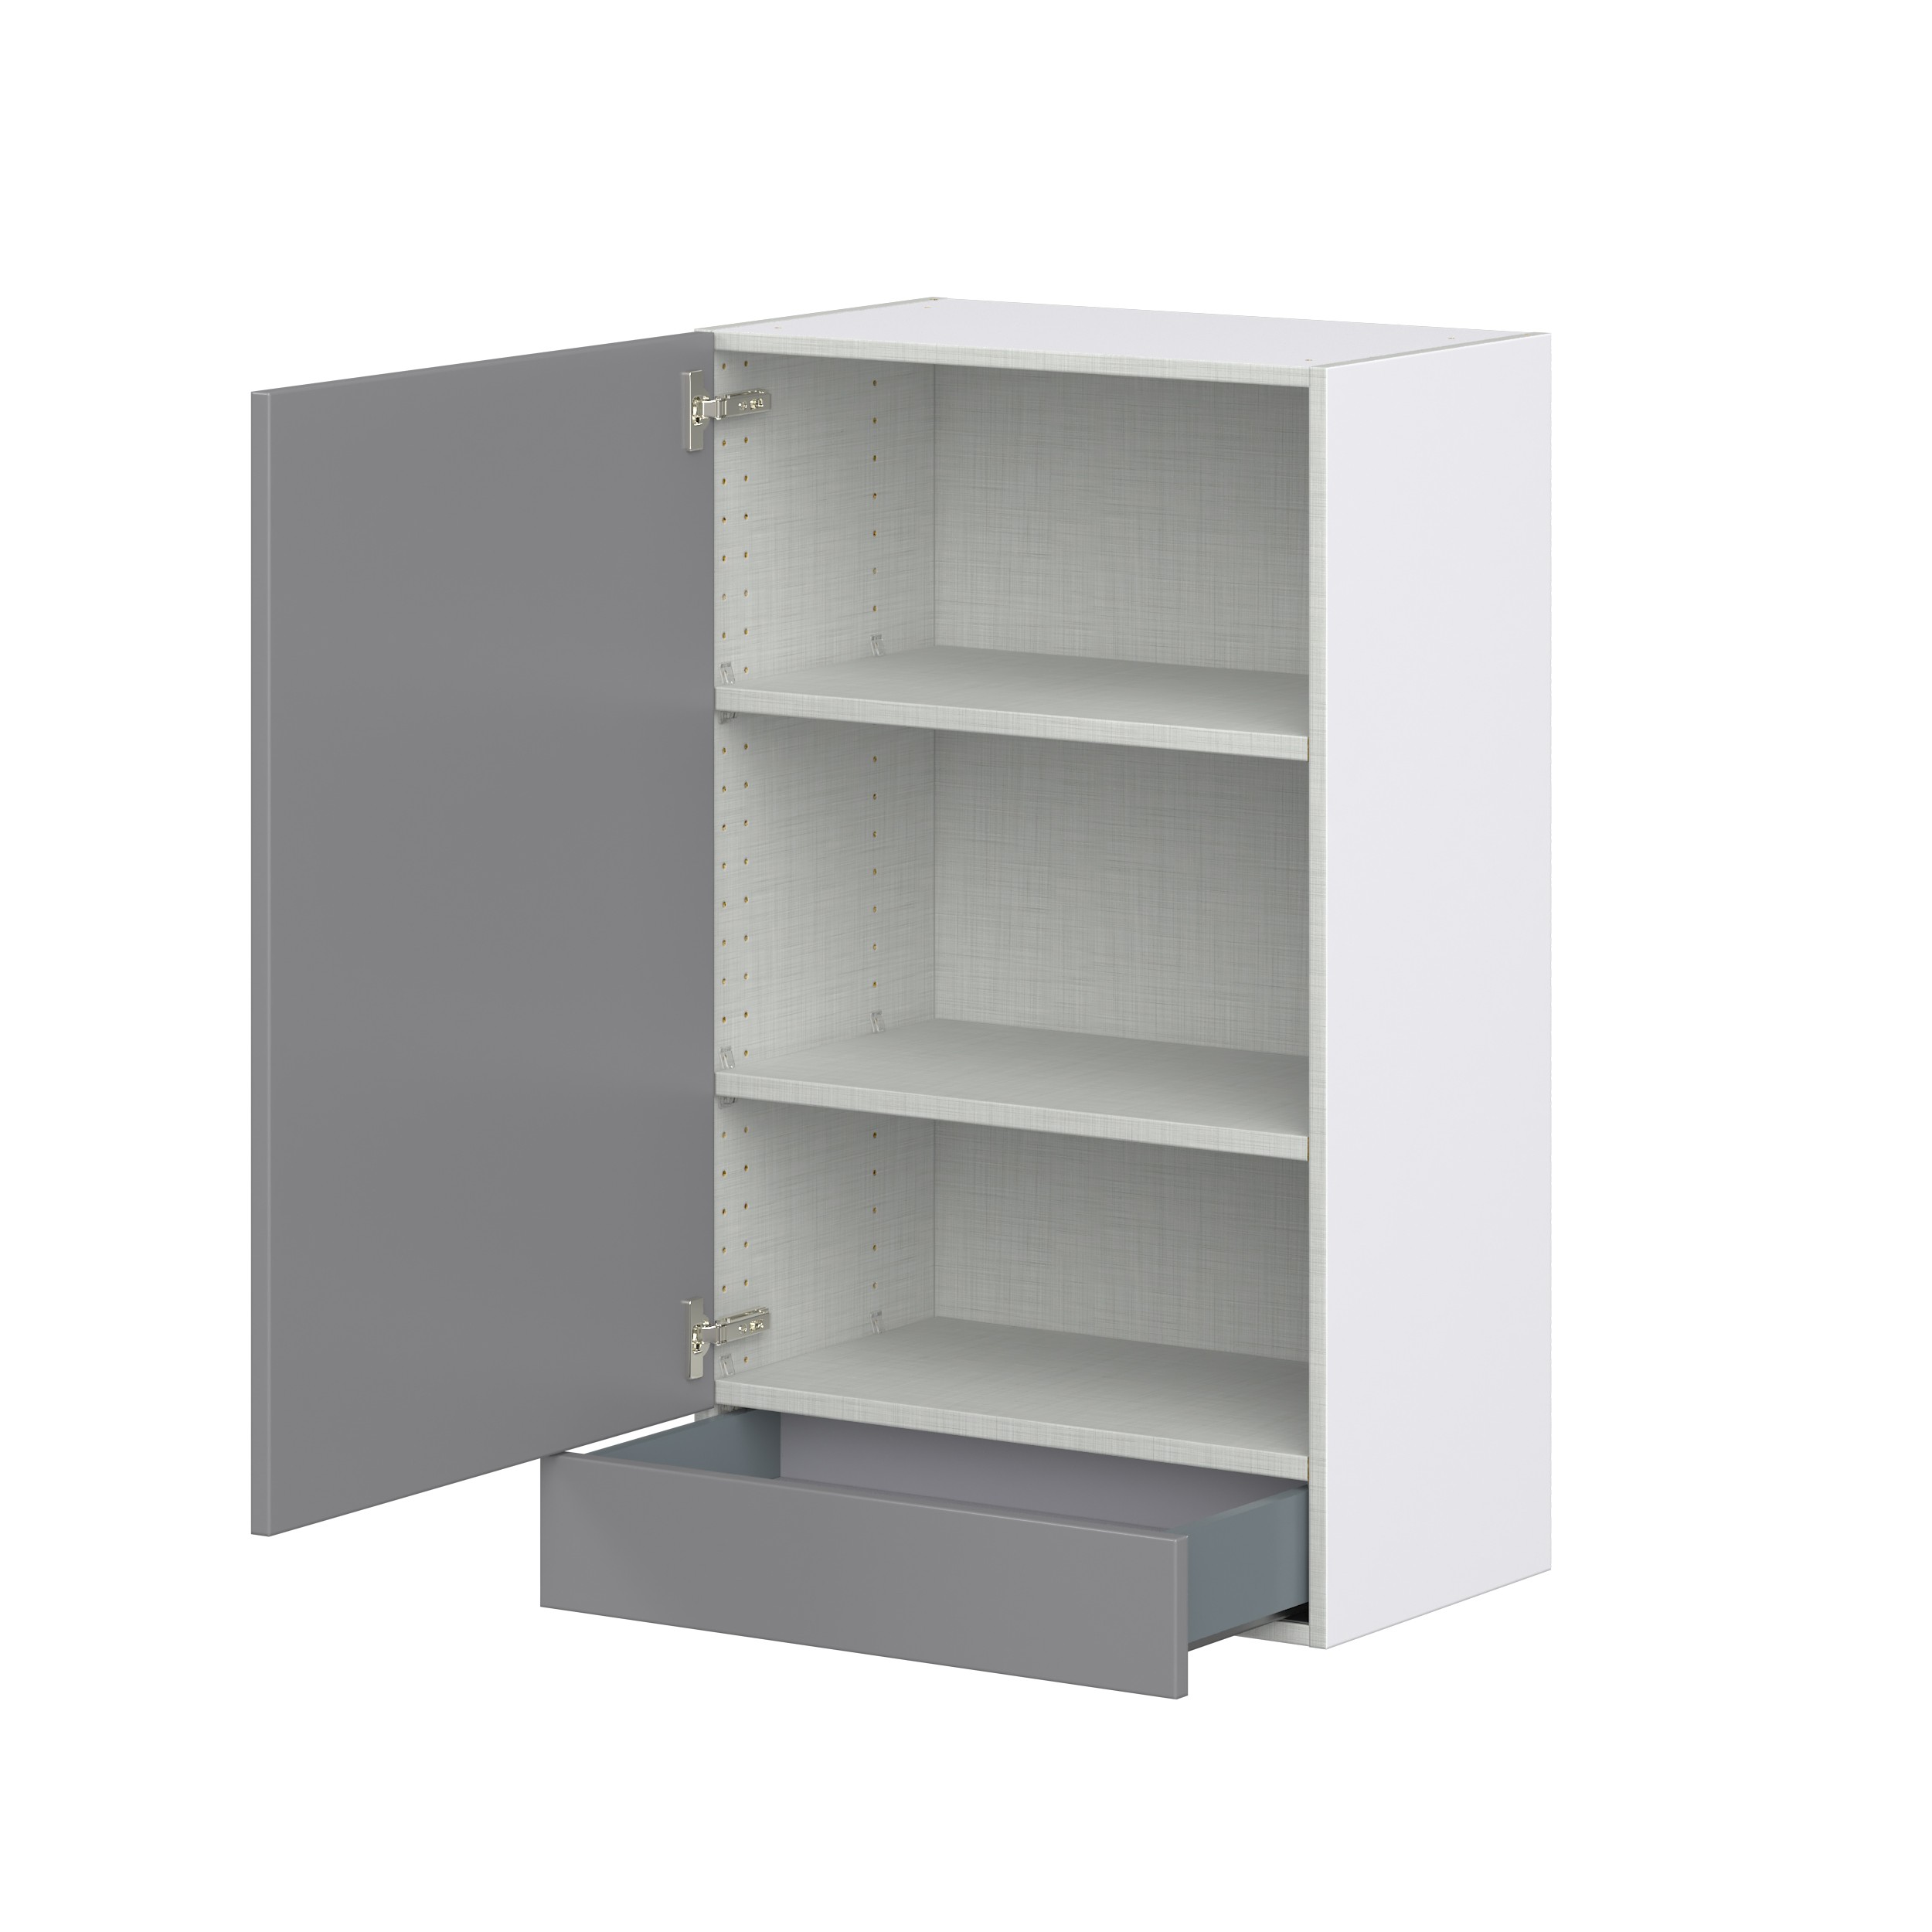 Willow Painted Slate Gray Shaker Assembled Wall Cabinet with a Door and a 5 in. Drawer (24 in. W x 40 in. H x 14 in. D)